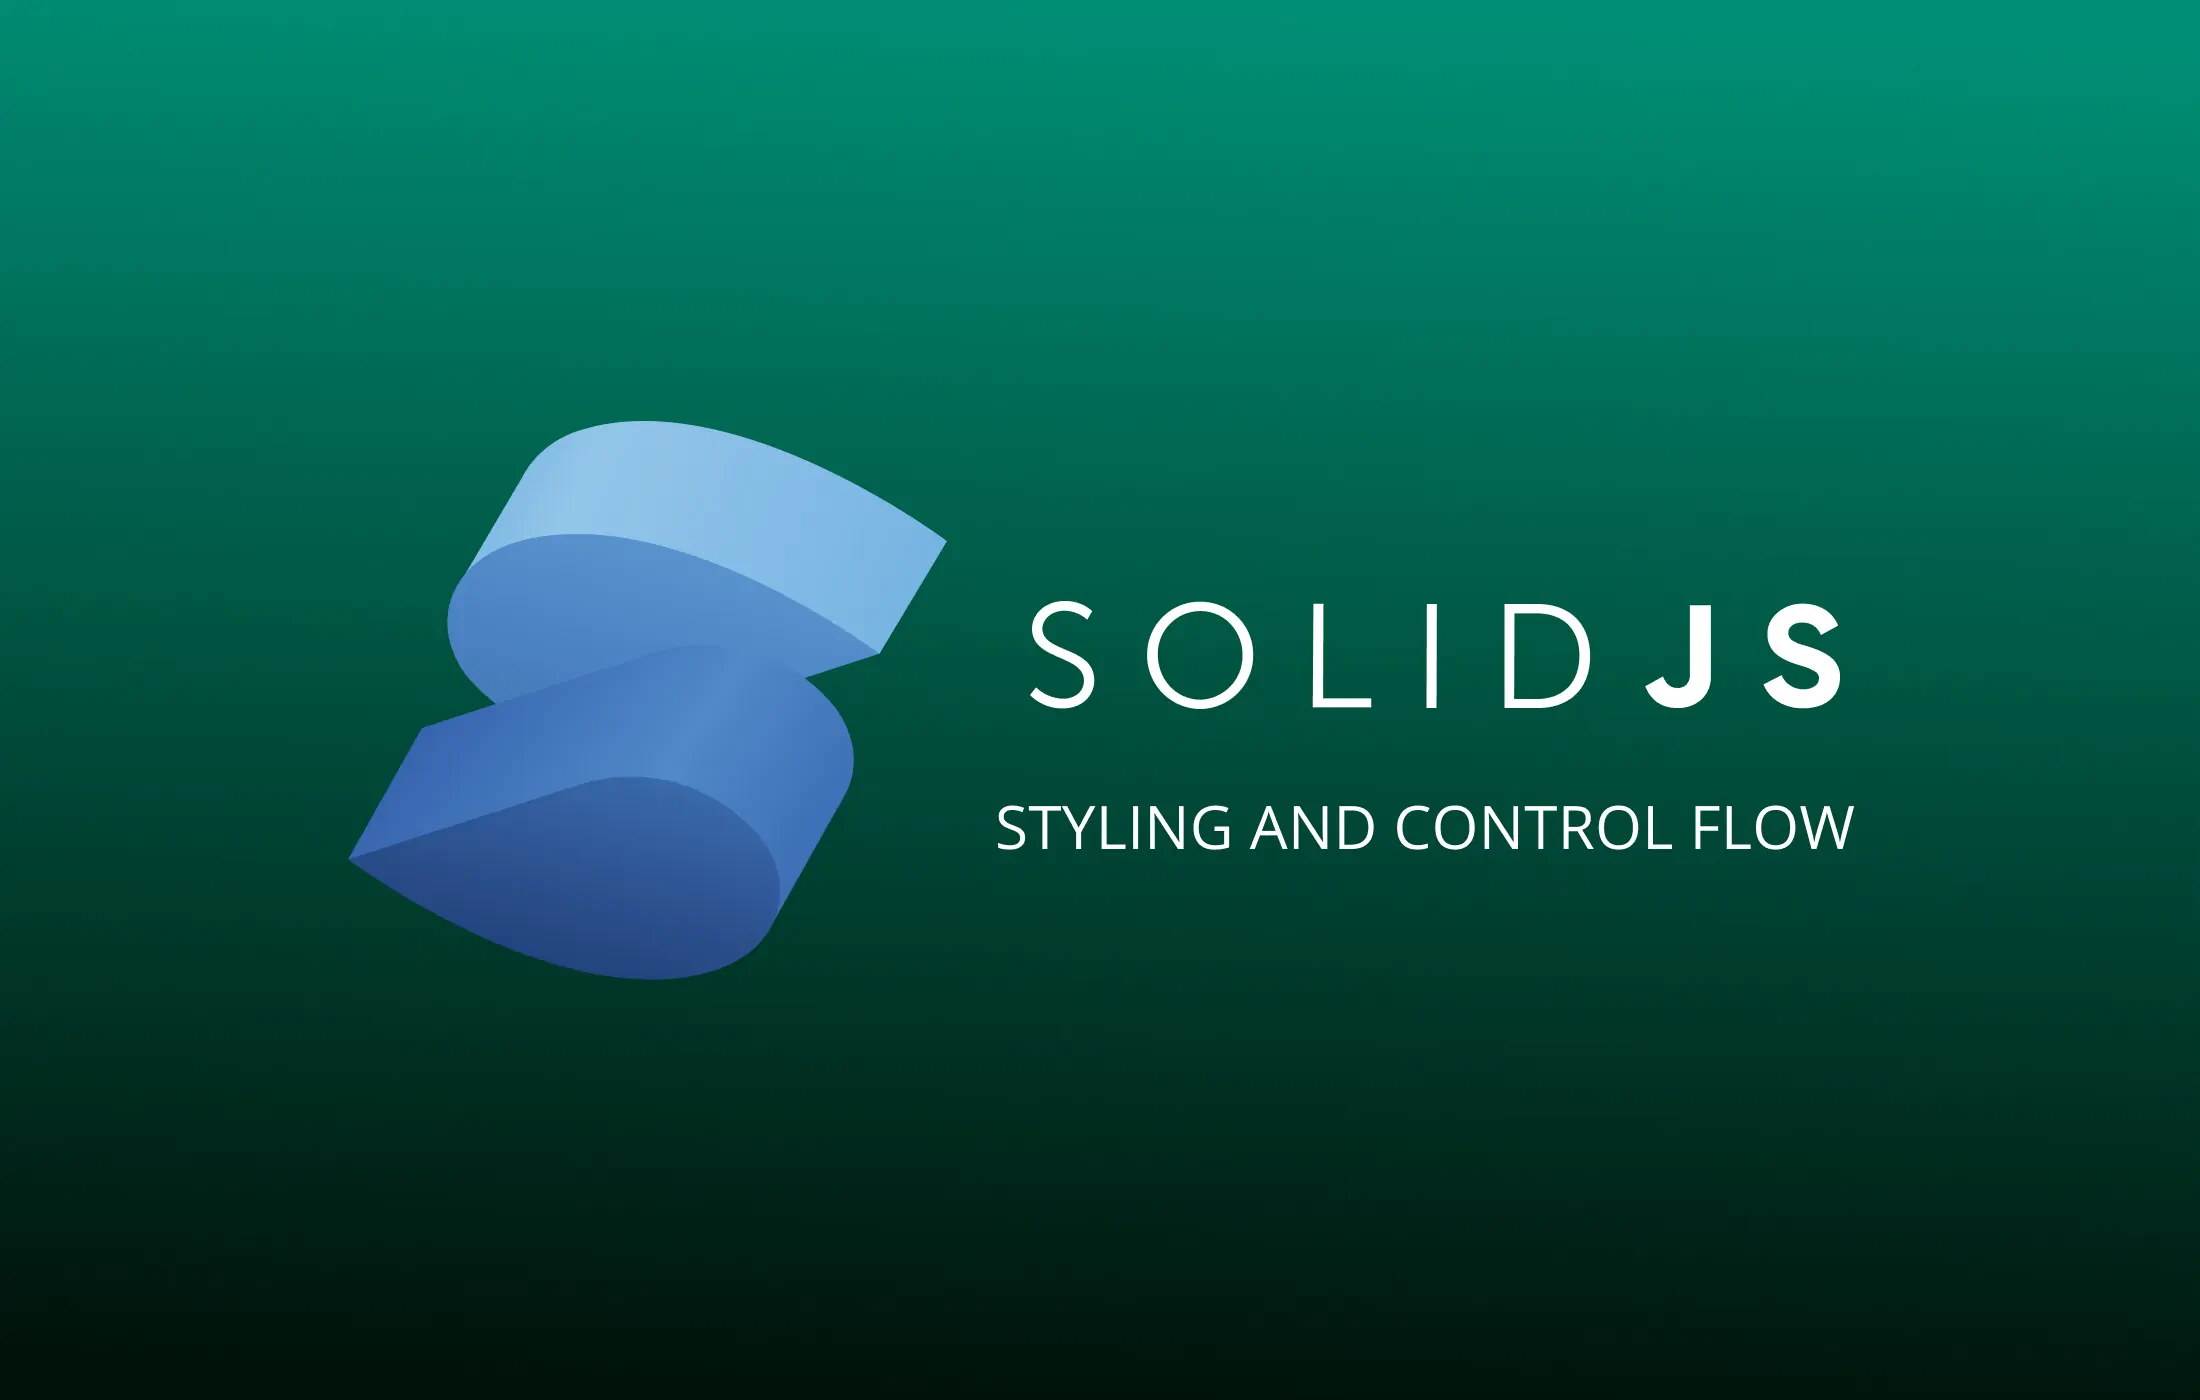 how to style solidjs